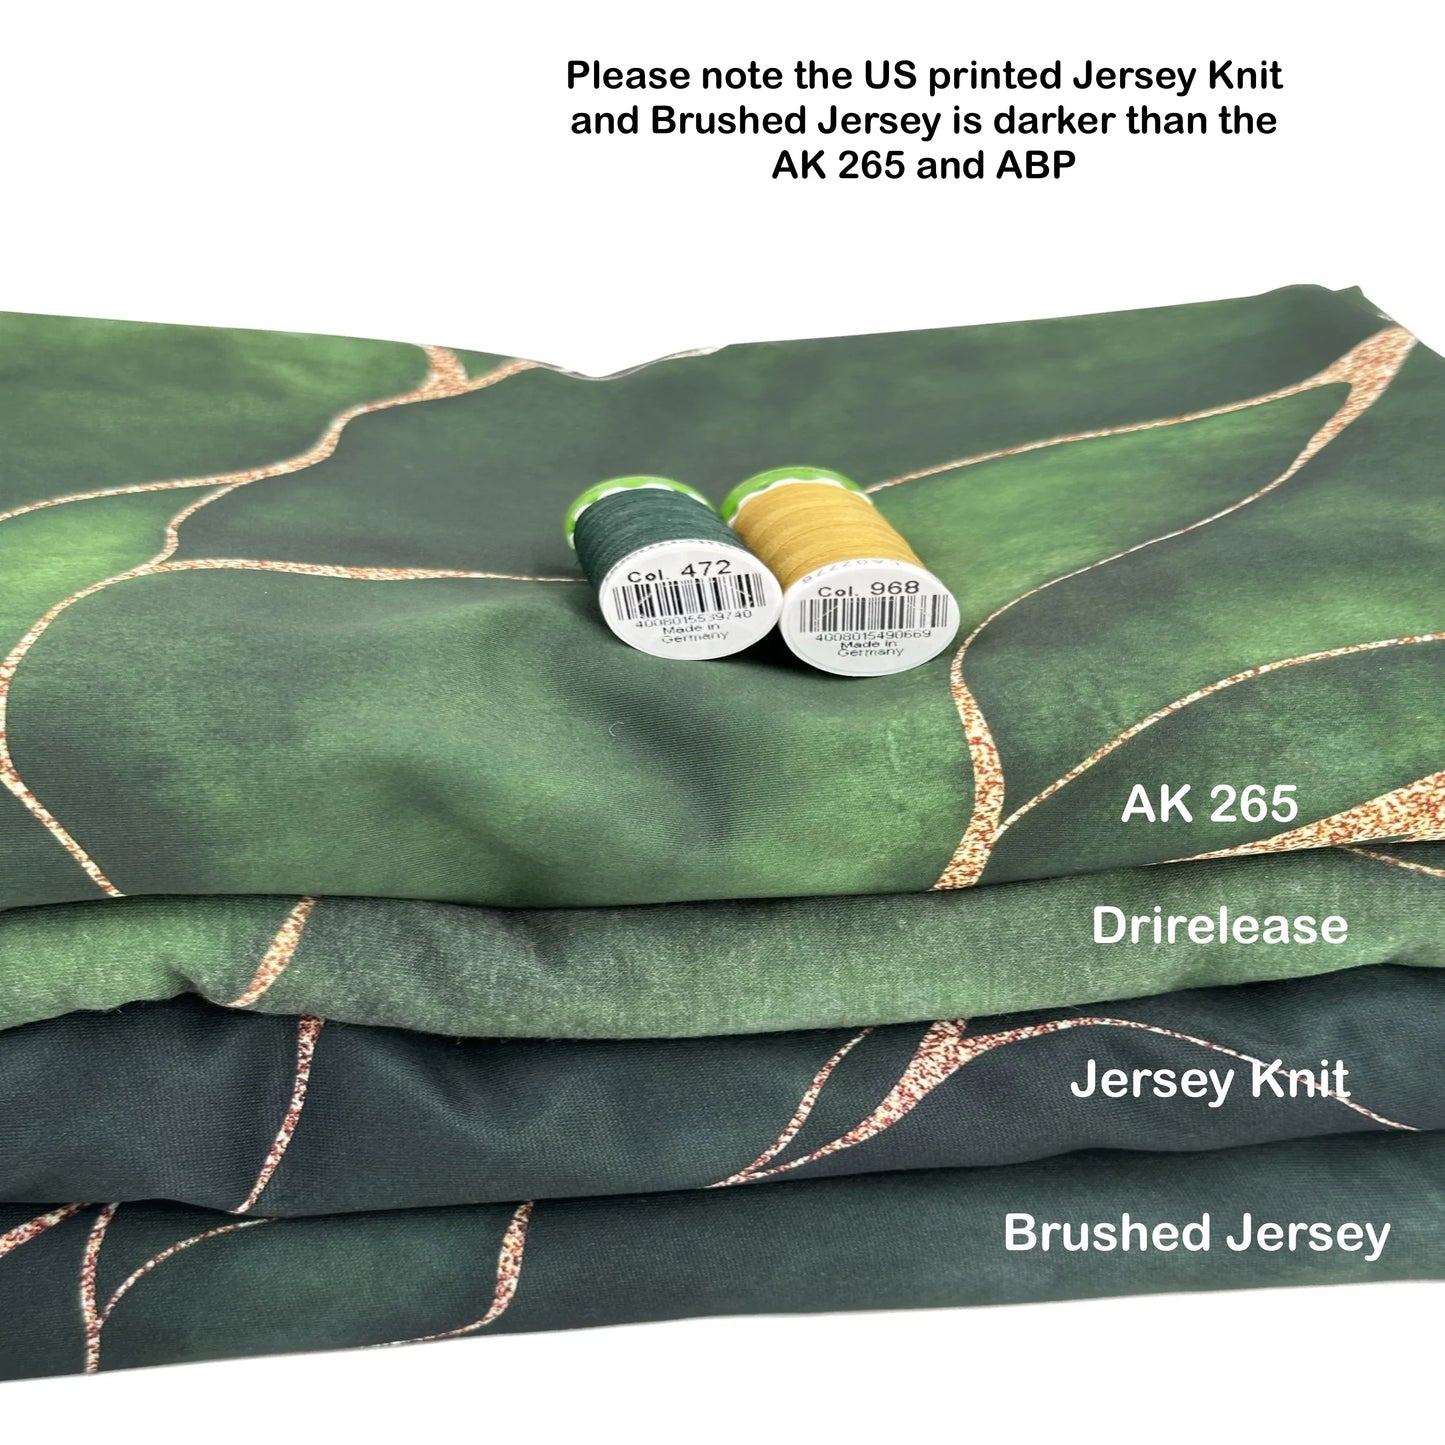 Brushed Jersey: Forest Leaves